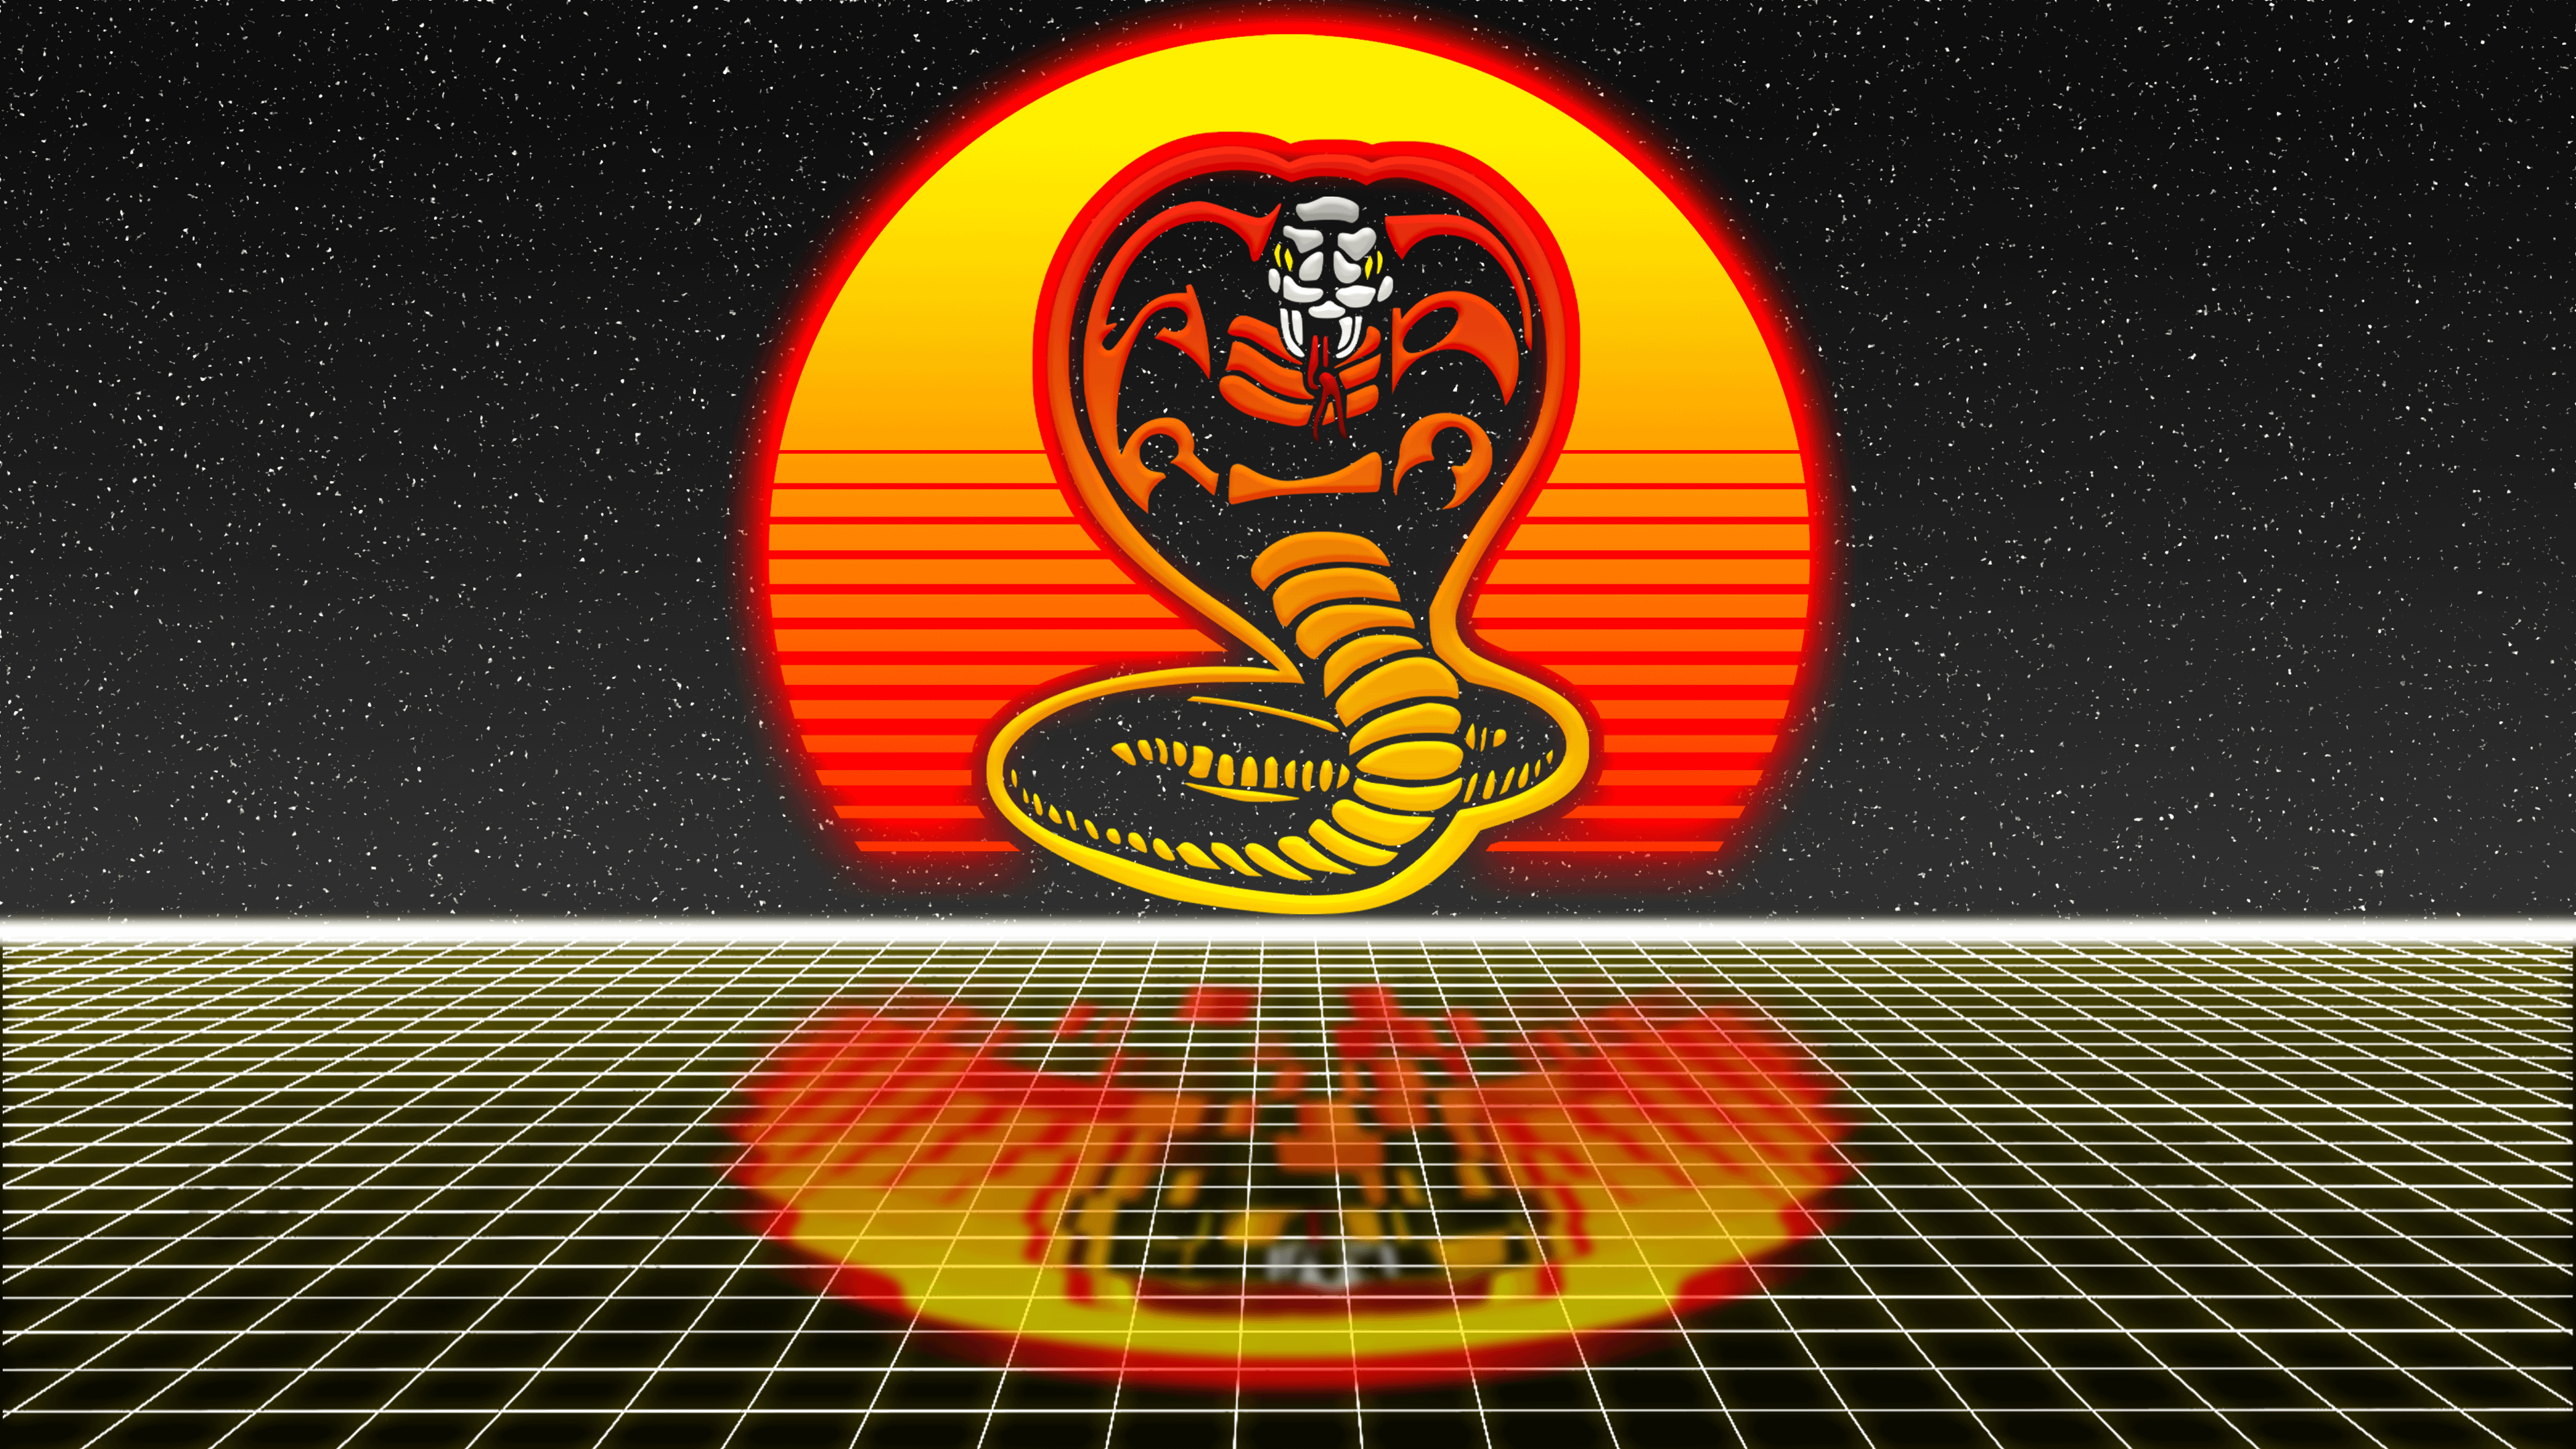 I Remastered A Miyagi Do Wallpaper A Few Weeks Back, And Someone Asked About Others, So I Gave The Same Treatment To My Cobra Kai One. Now To Make An Eagle Fang Wallpaper